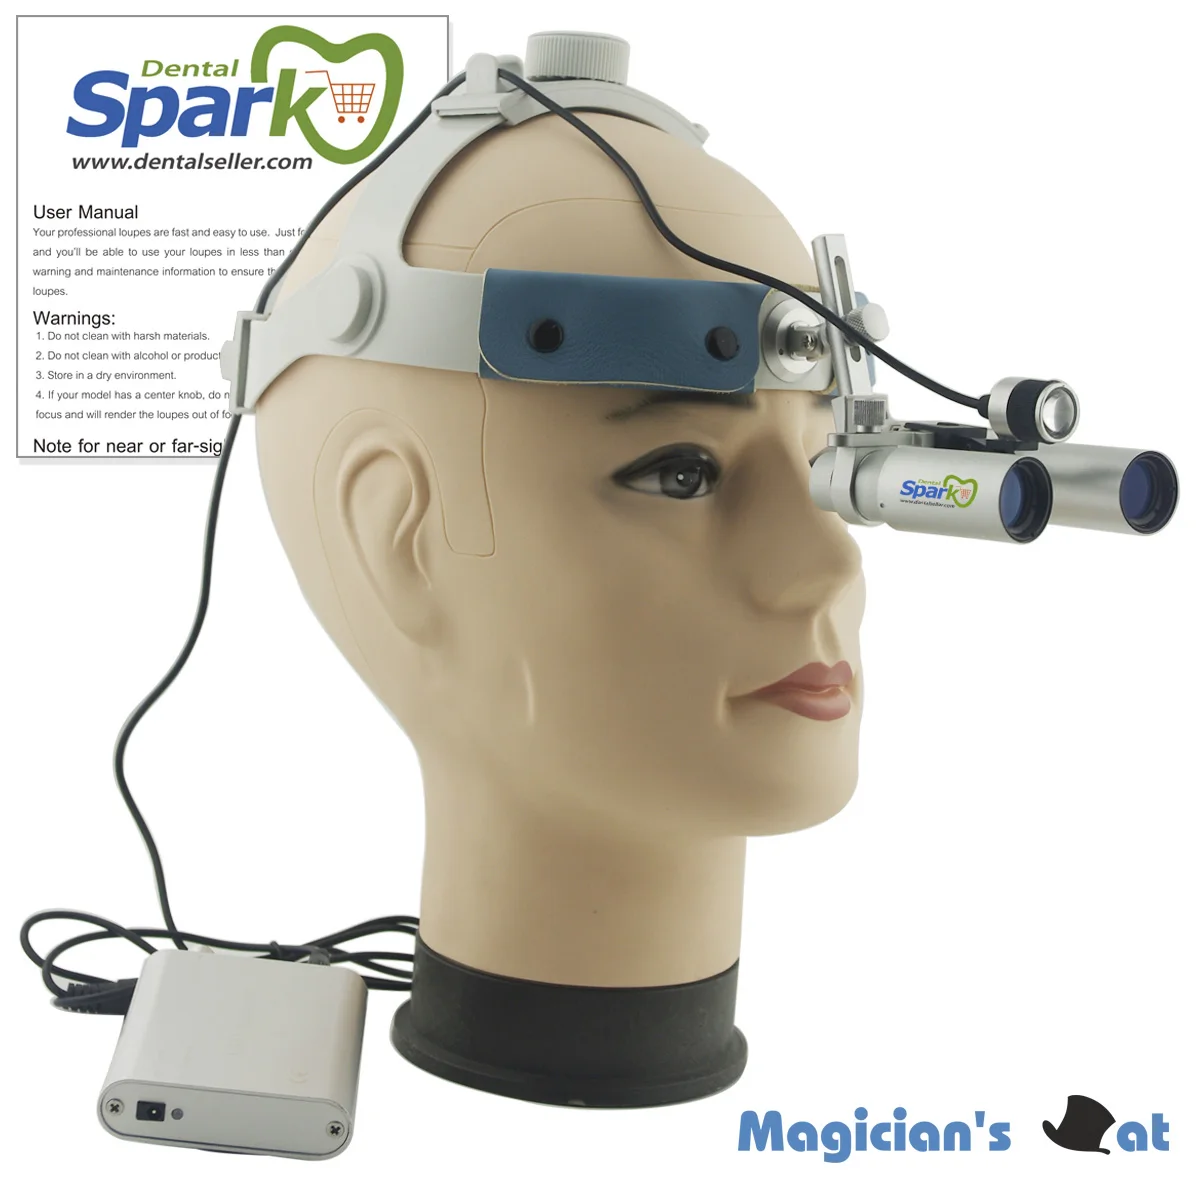 Spark 6.0x Magnification Professional APD Loupes with Comfortable Headband and Mounted LED Head Light for Dental, Surgical